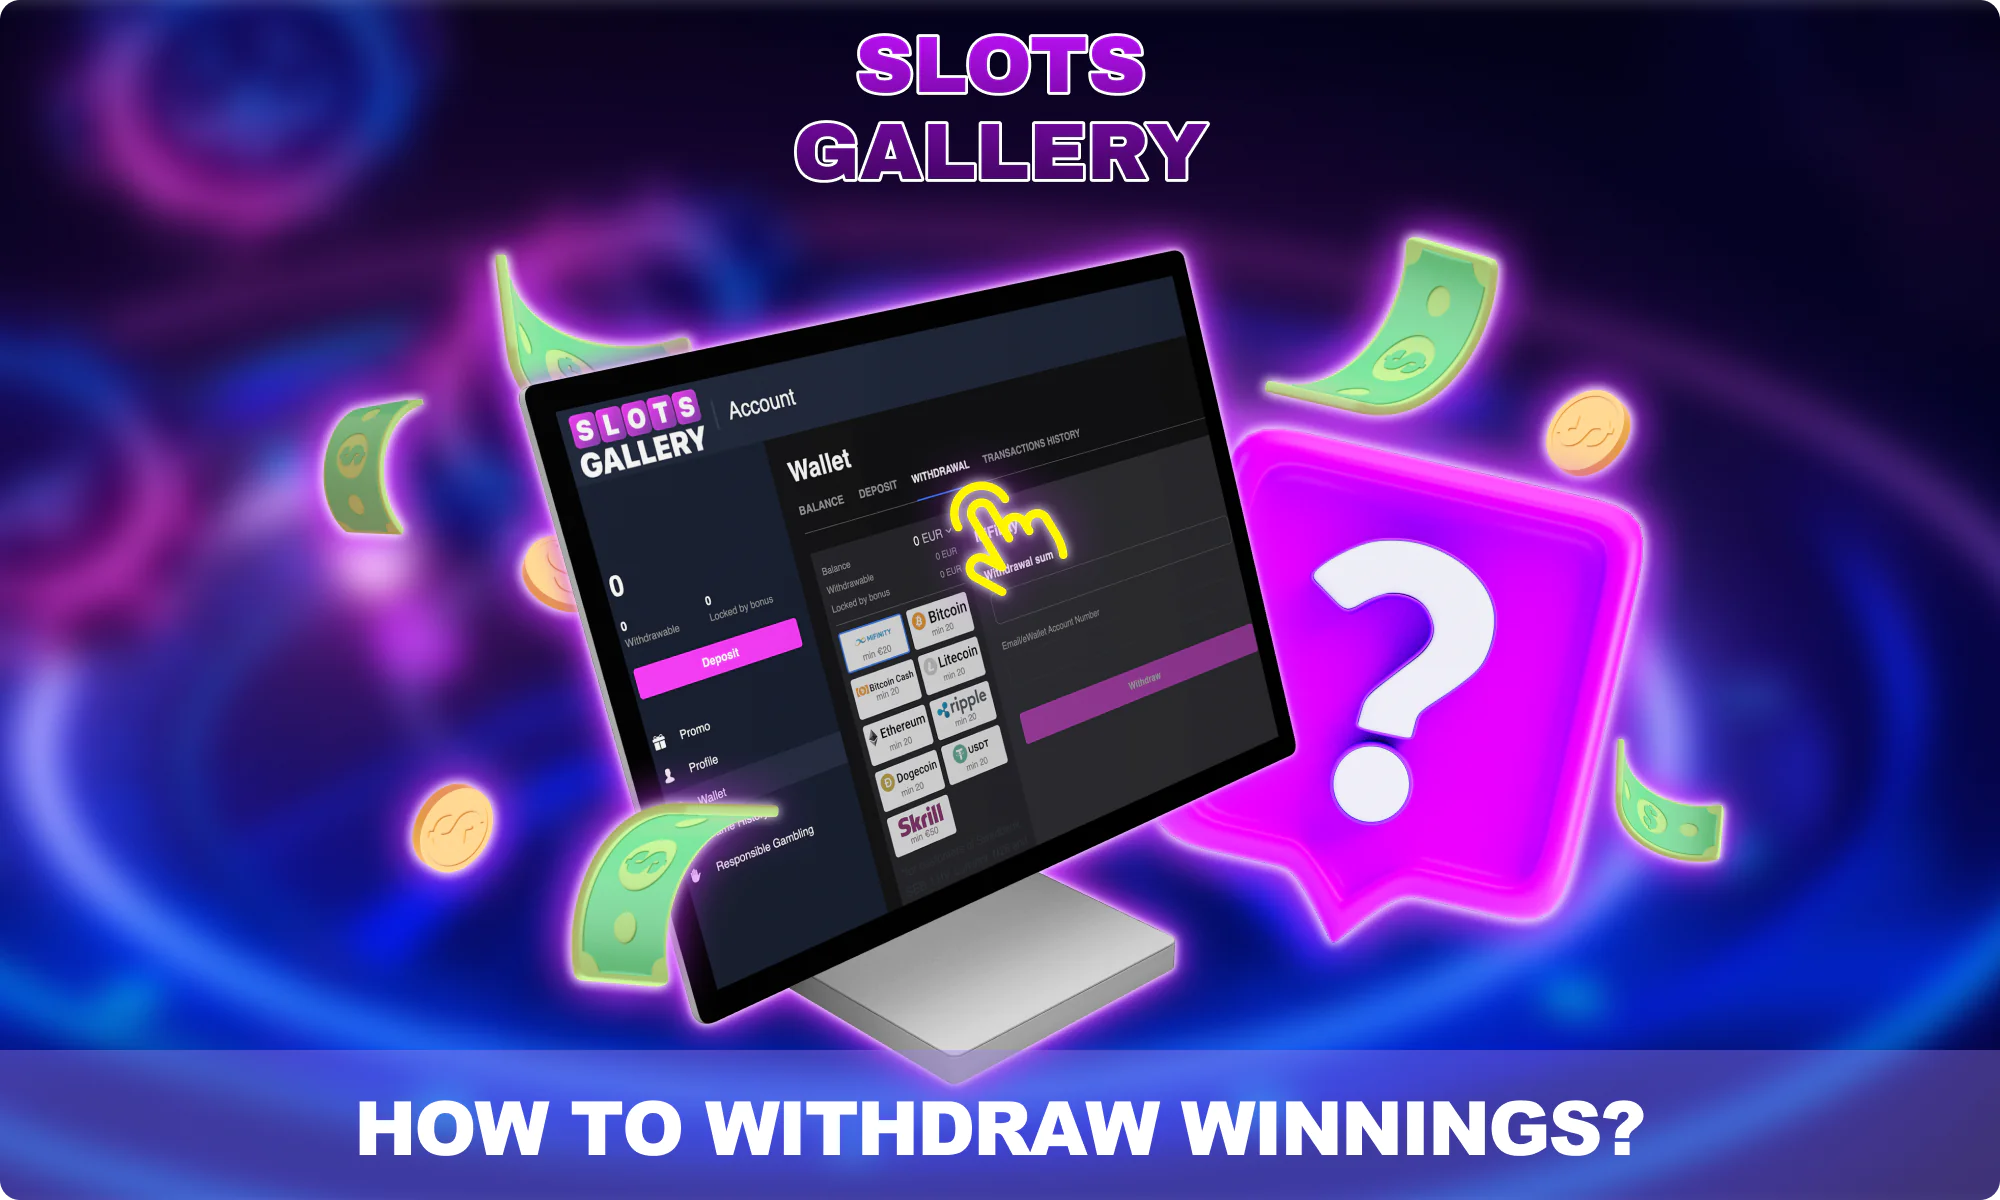 What do you need to do to withdraw money - Slots Gallery Australia